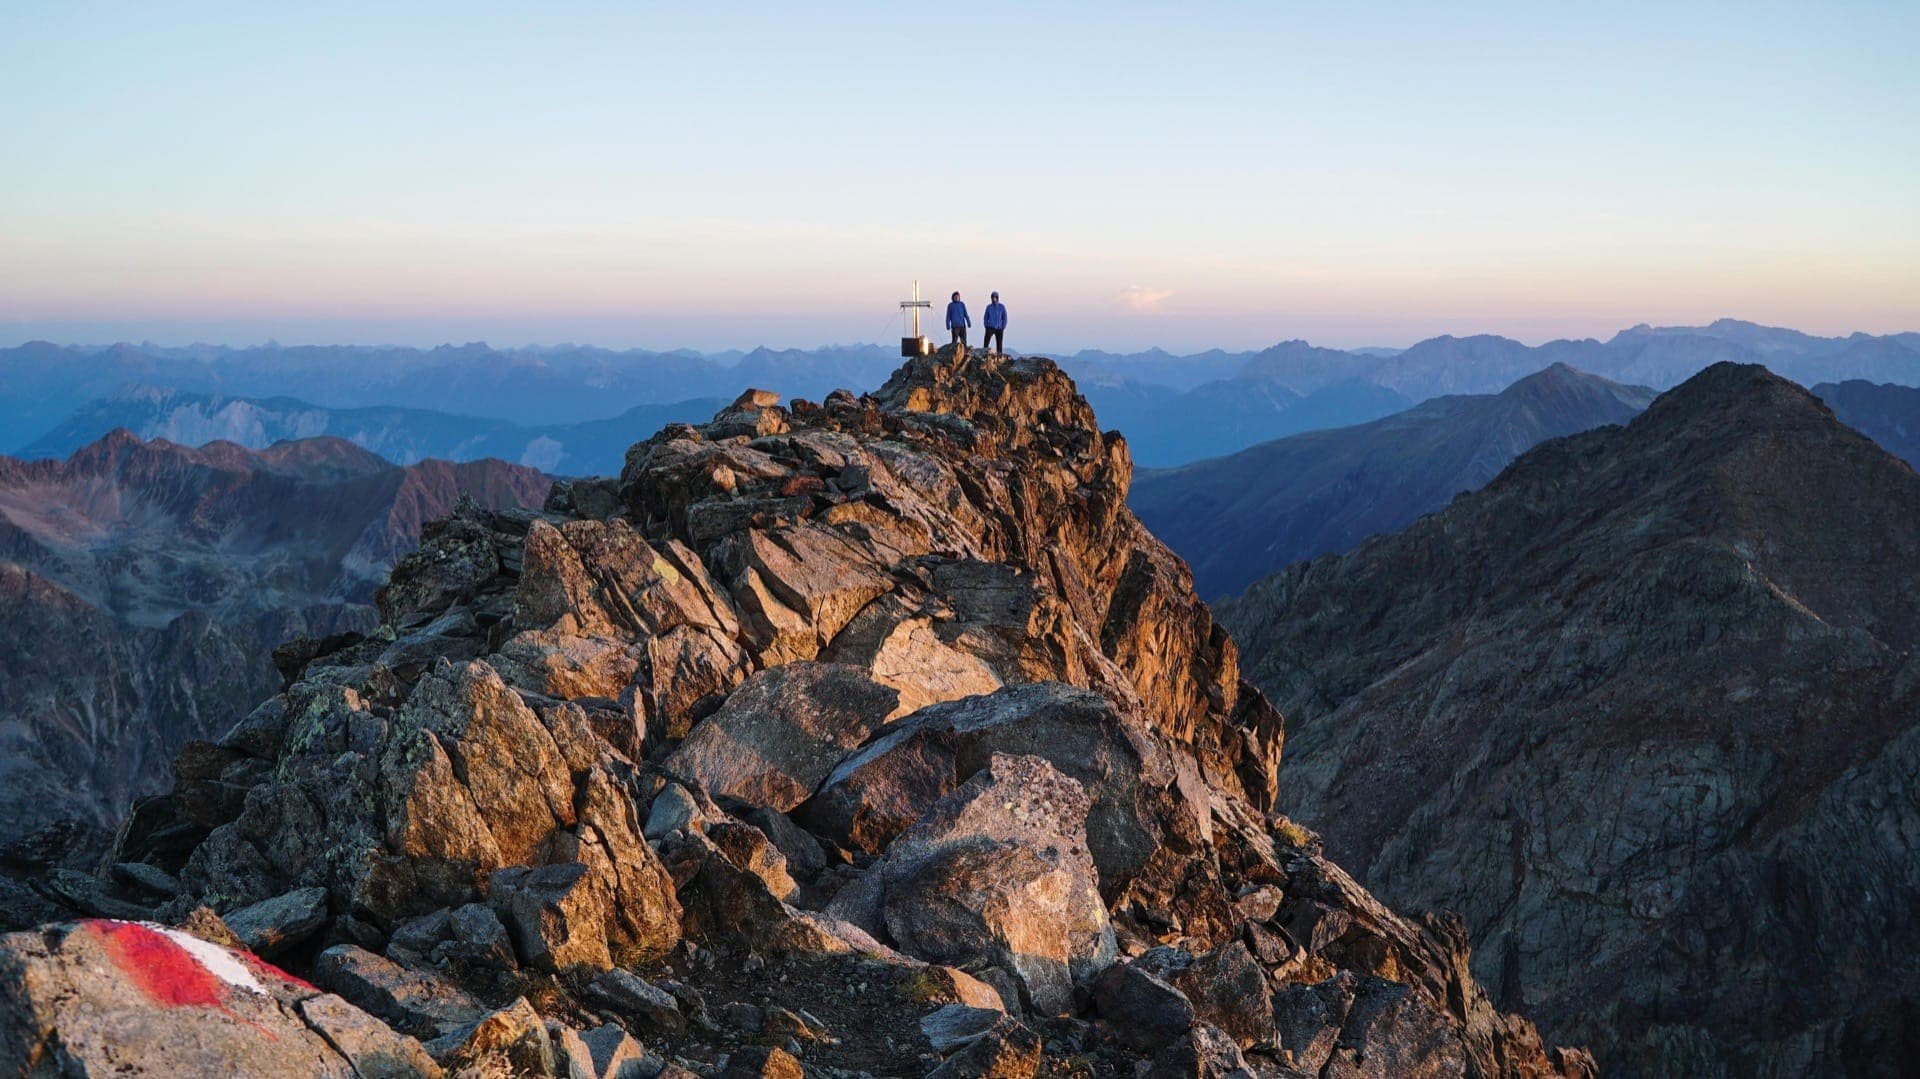 Peak of a Mountain in the Tyrol with two persons